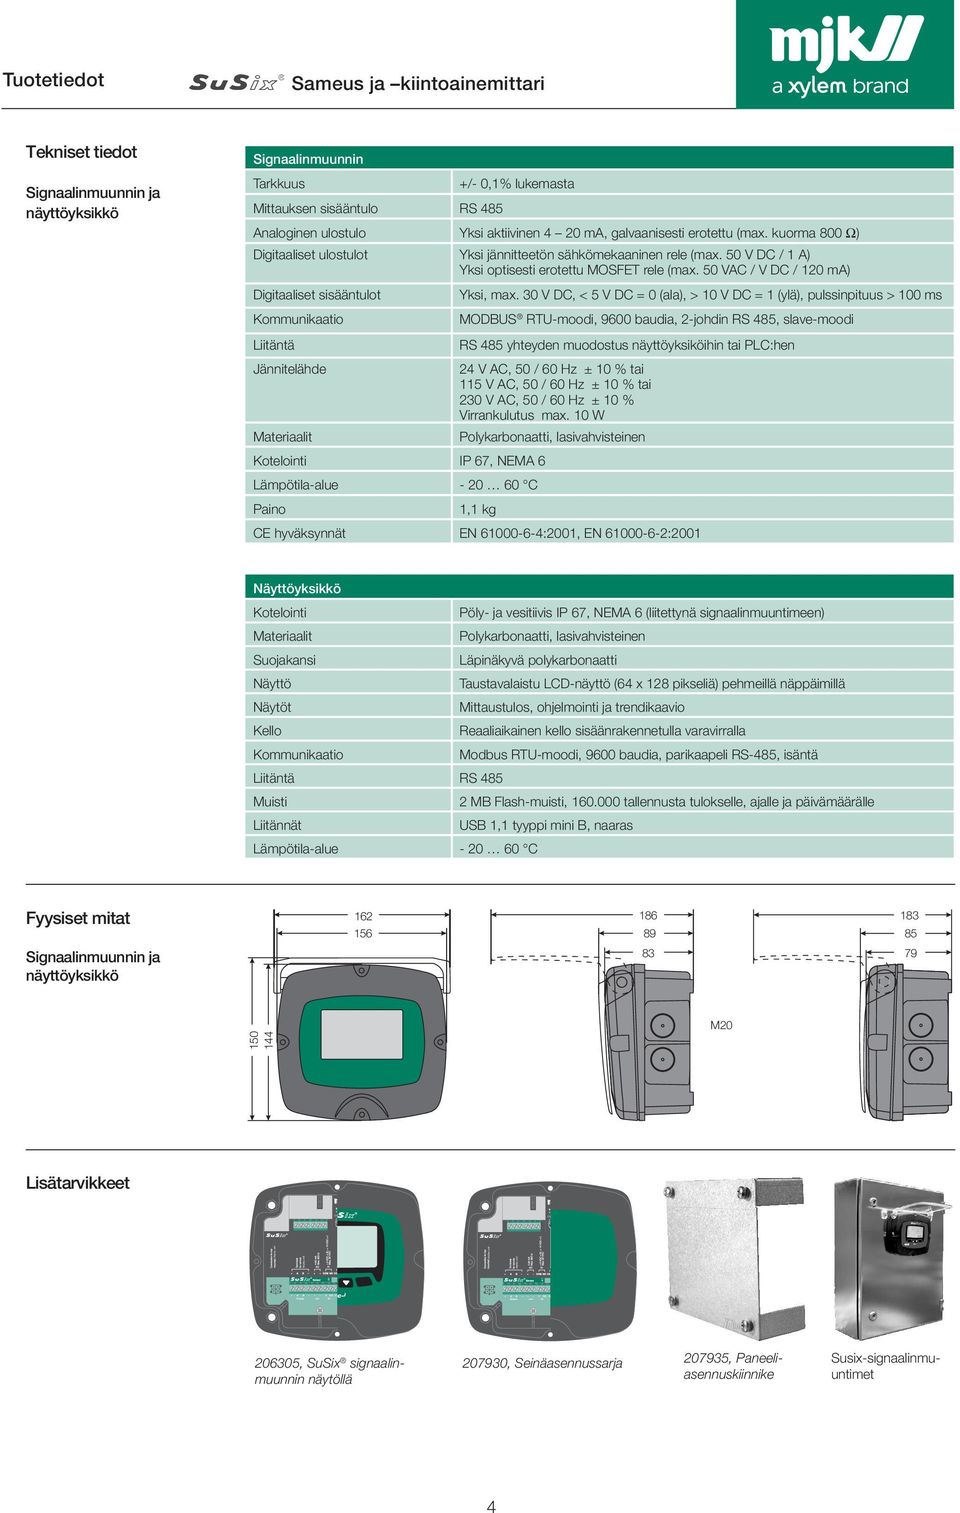 - + - C NO C1 N01 C2 N02 PE N L -Display- -ma- -DI- -D01- -D02- Mains supply  four MJK converters with Modbus can be connected to one : Converter #1 Converter #4 Display unit 2 wire 4 wire